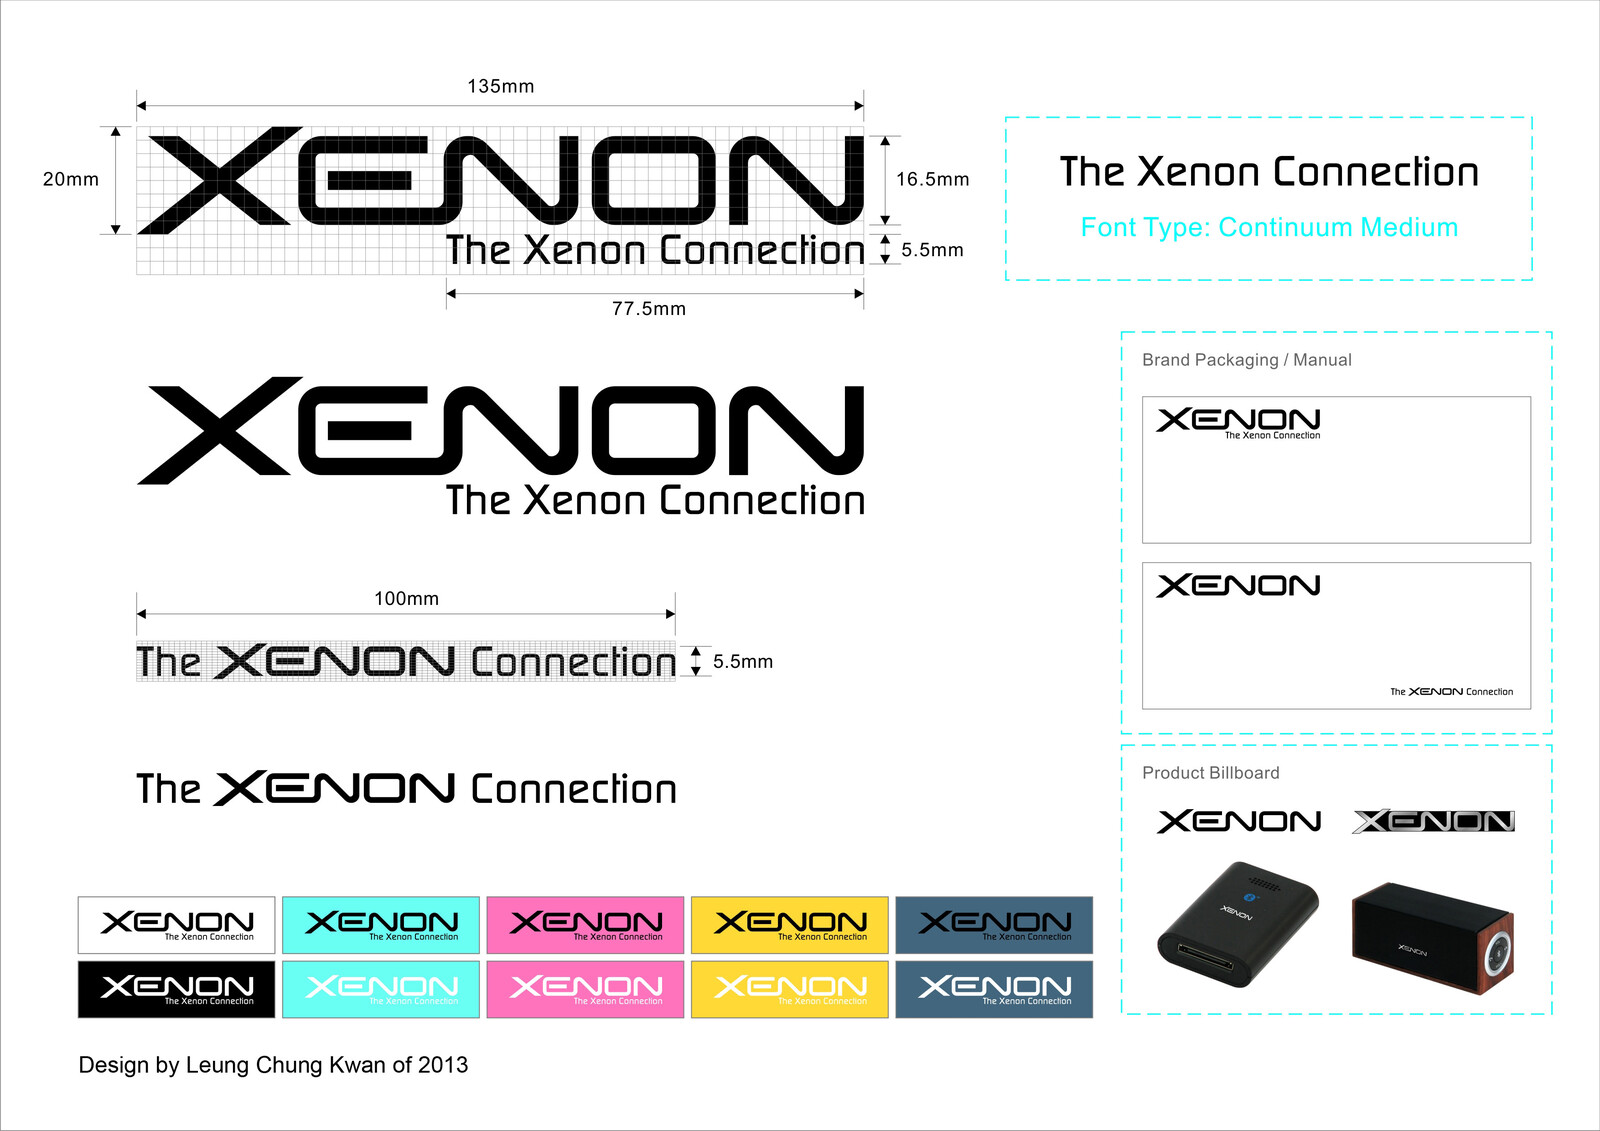 💎 Logo | Design by Leung Chung Kwan on 2013 💎
Brand Name︰xenon | Client︰OTIC Limited